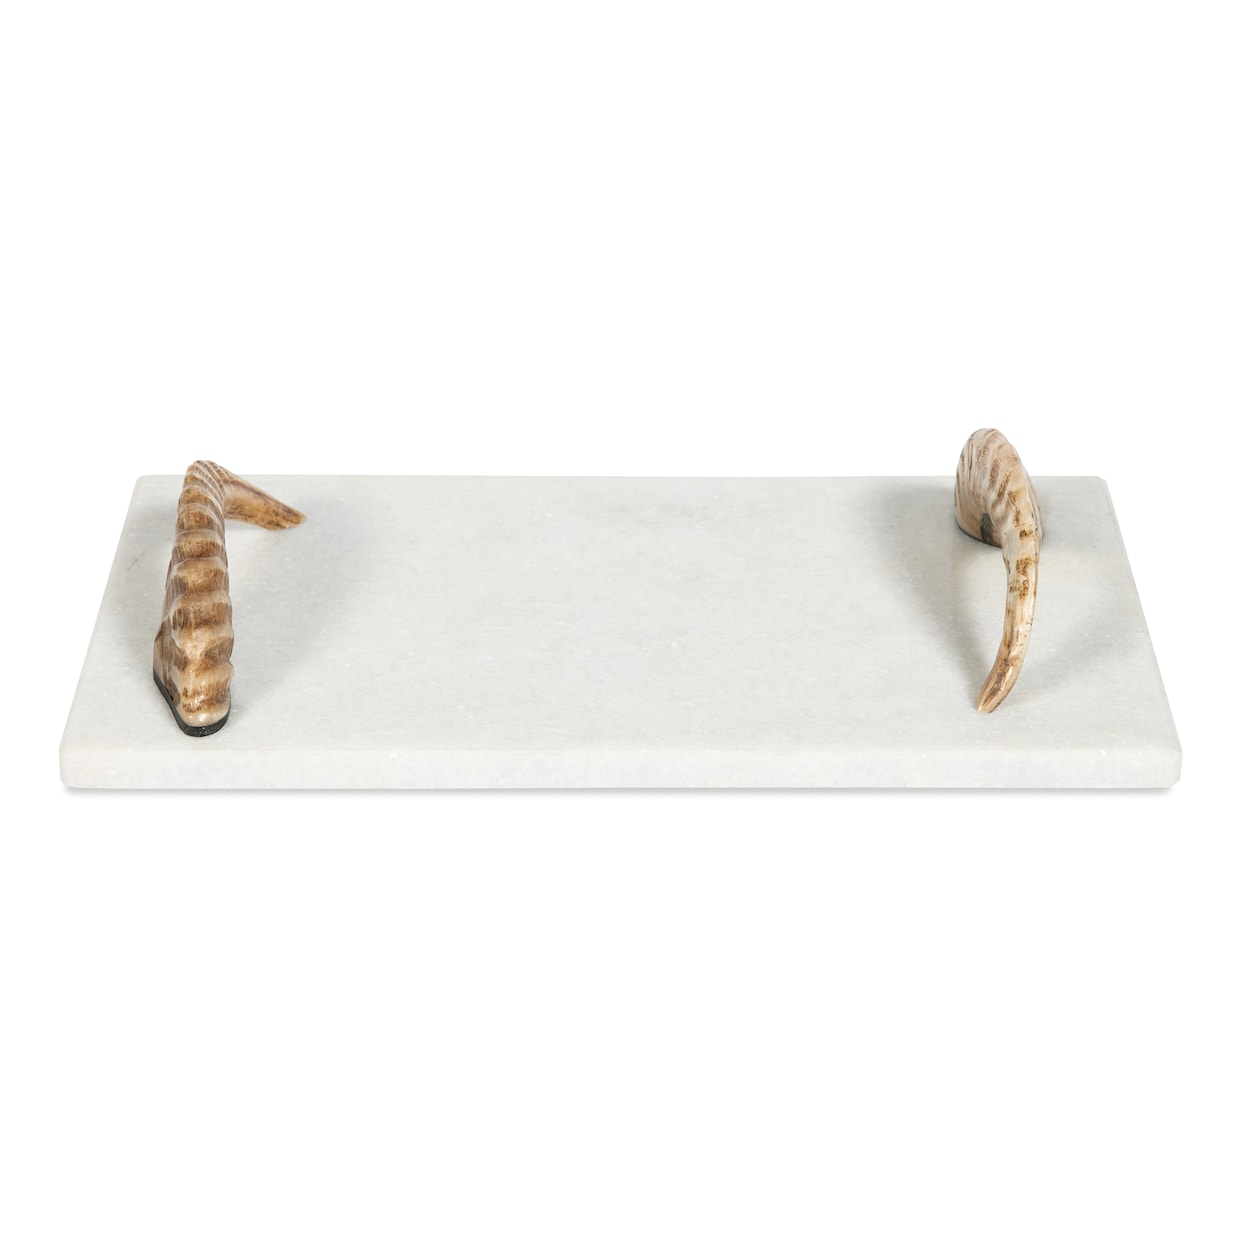 BOBO Intriguing Objects BOBO Intriguing Objects Odin White Marble Cheese Board